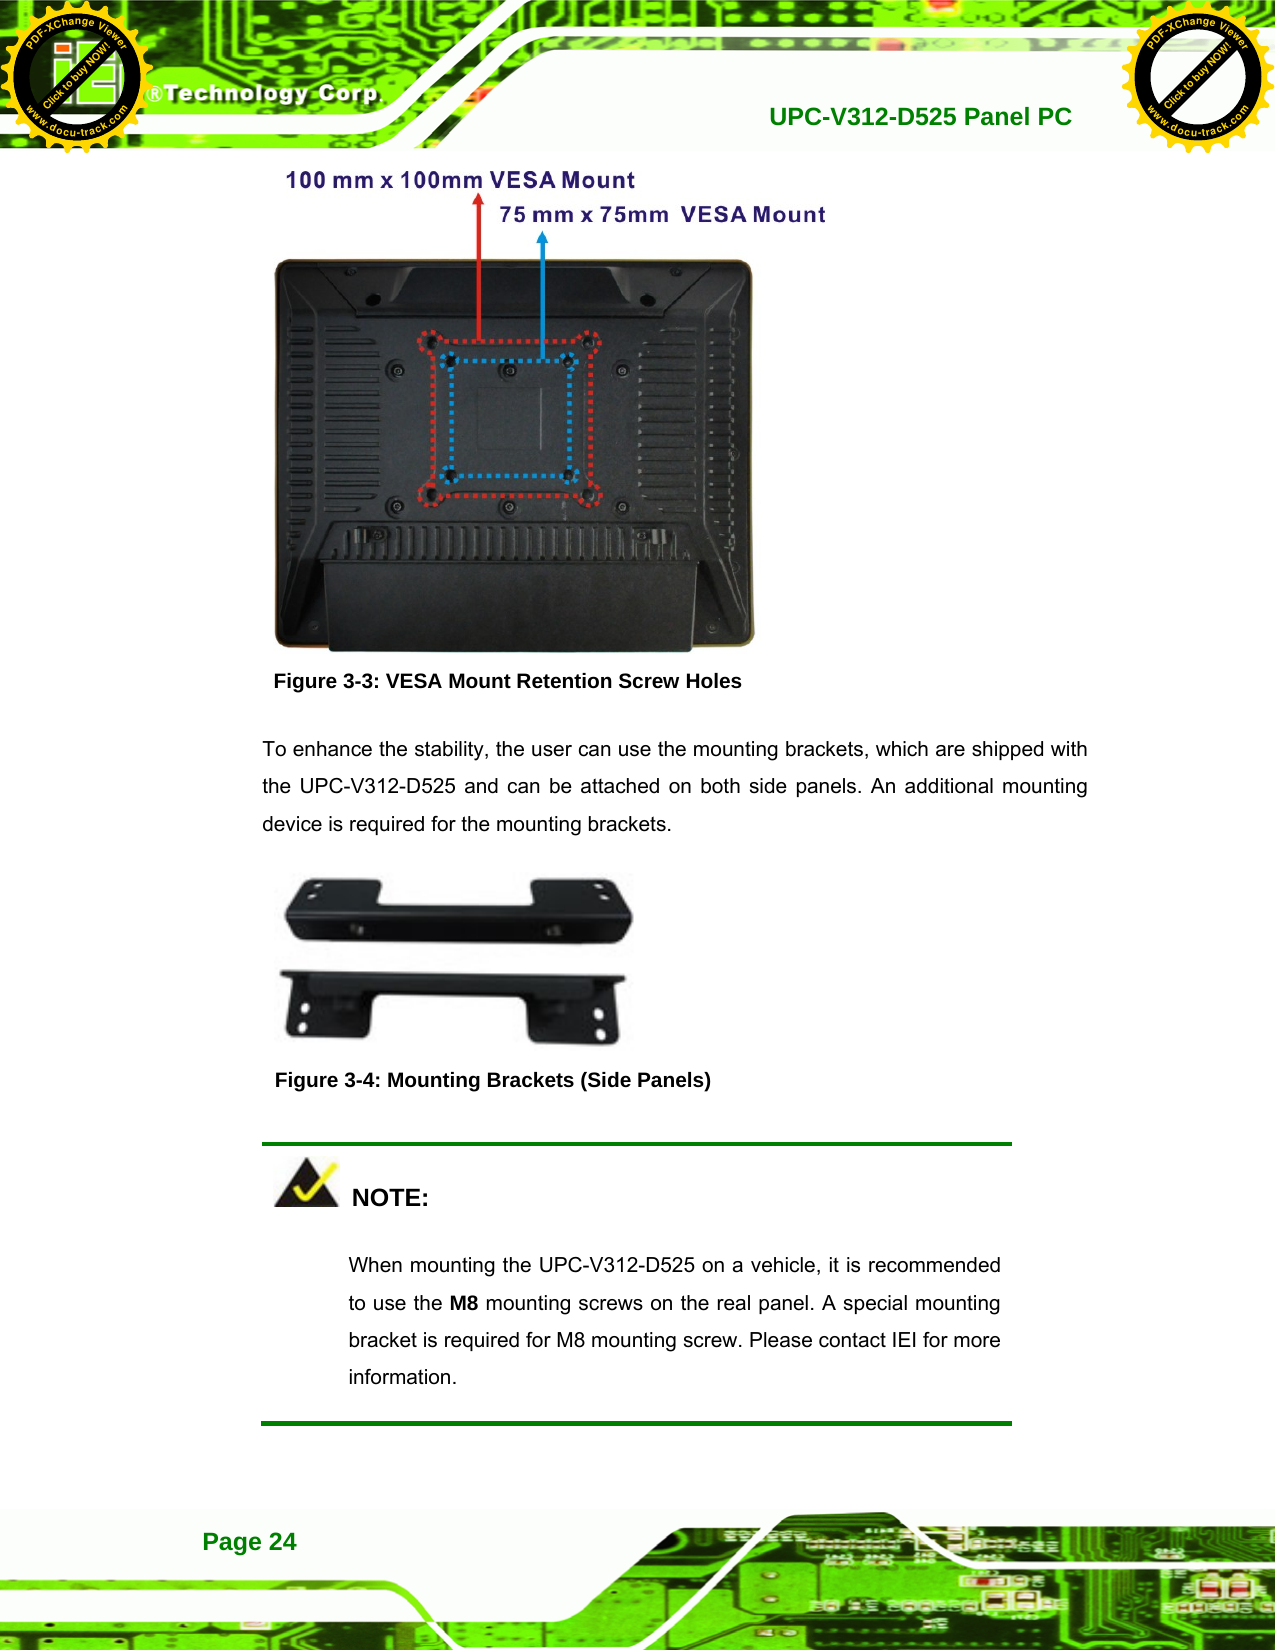   UPC-V312-D525 Panel PCPage 24  Figure 3-3: VESA Mount Retention Screw Holes To enhance the stability, the user can use the mounting brackets, which are shipped with the UPC-V312-D525 and can be attached on both side panels. An additional mounting device is required for the mounting brackets.    Figure 3-4: Mounting Brackets (Side Panels)   NOTE: When mounting the UPC-V312-D525 on a vehicle, it is recommended to use the M8 mounting screws on the real panel. A special mounting bracket is required for M8 mounting screw. Please contact IEI for more information.  Click to buy NOW!PDF-XChange Viewerwww.docu-track.comClick to buy NOW!PDF-XChange Viewerwww.docu-track.com